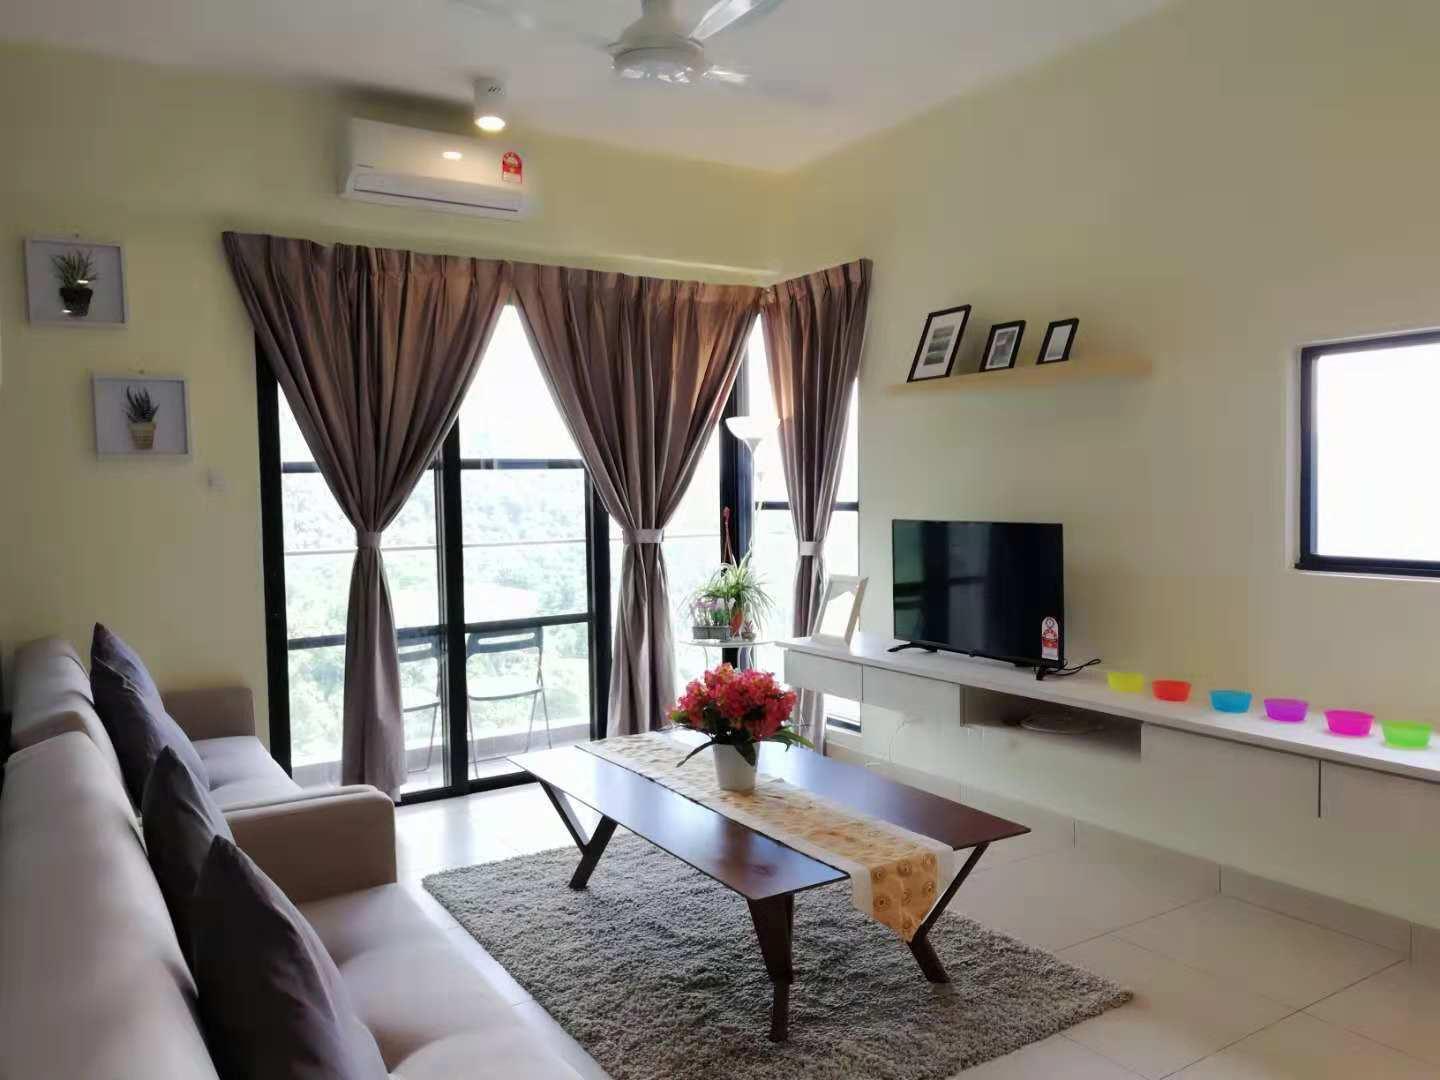 Home Sweet Home 1313 Midhill Genting (Free Wifi) - 겐팅 하일랜즈